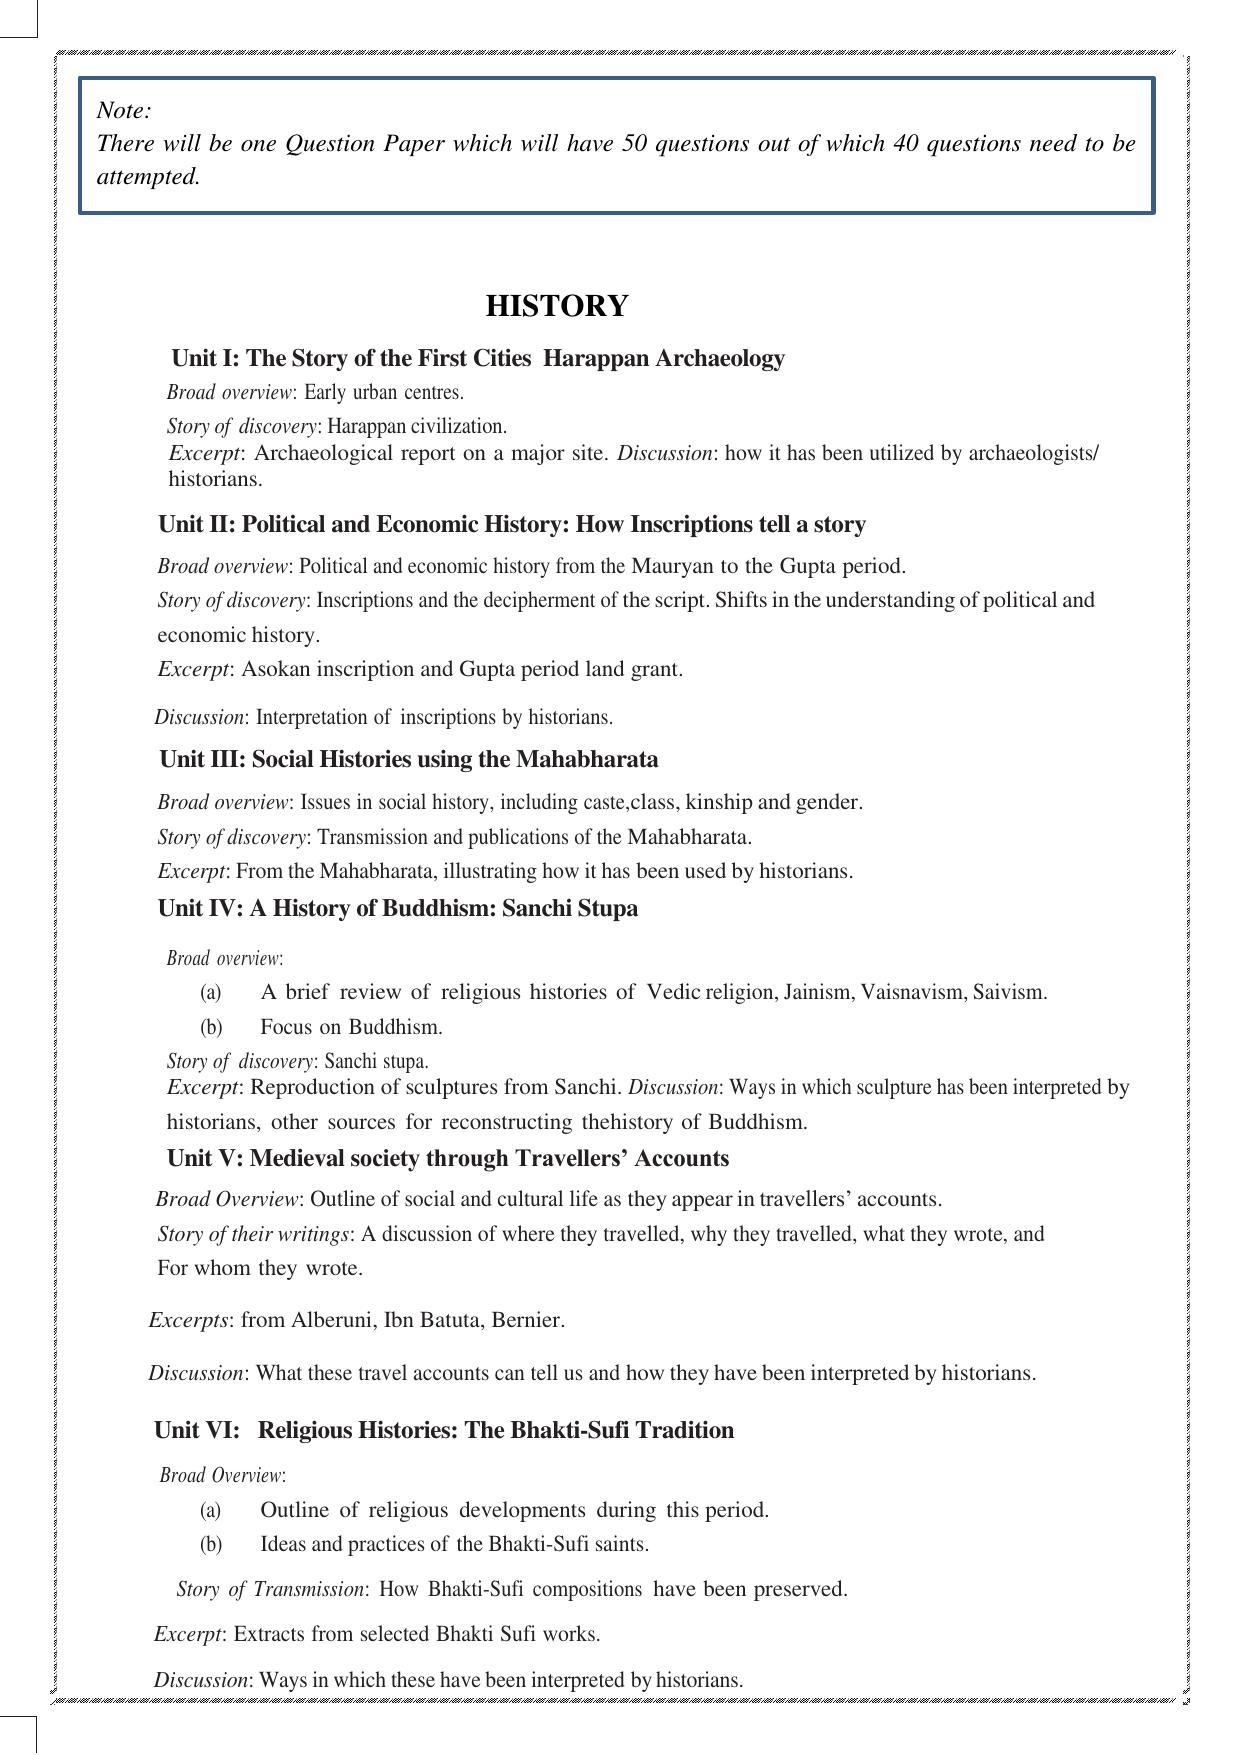 CUET Syllabus for History (English) - Page 2